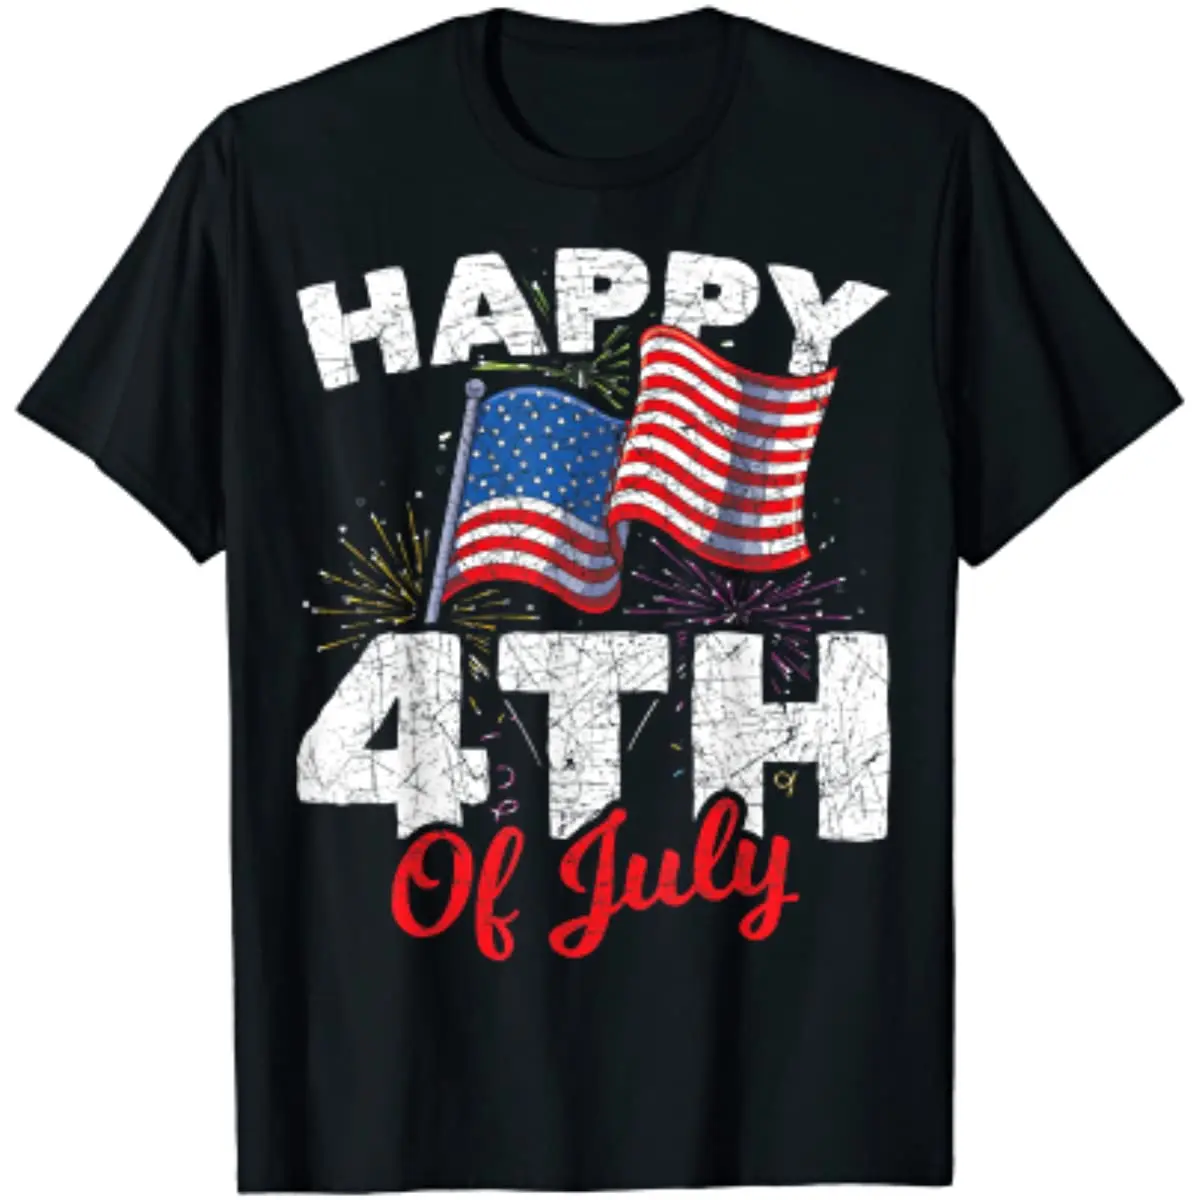 

Happy 4th of July Patriotic American US Flag 4th of July T-Shirt Oversized T Shirt Casual Daily Four Seasons Tees Streetwear